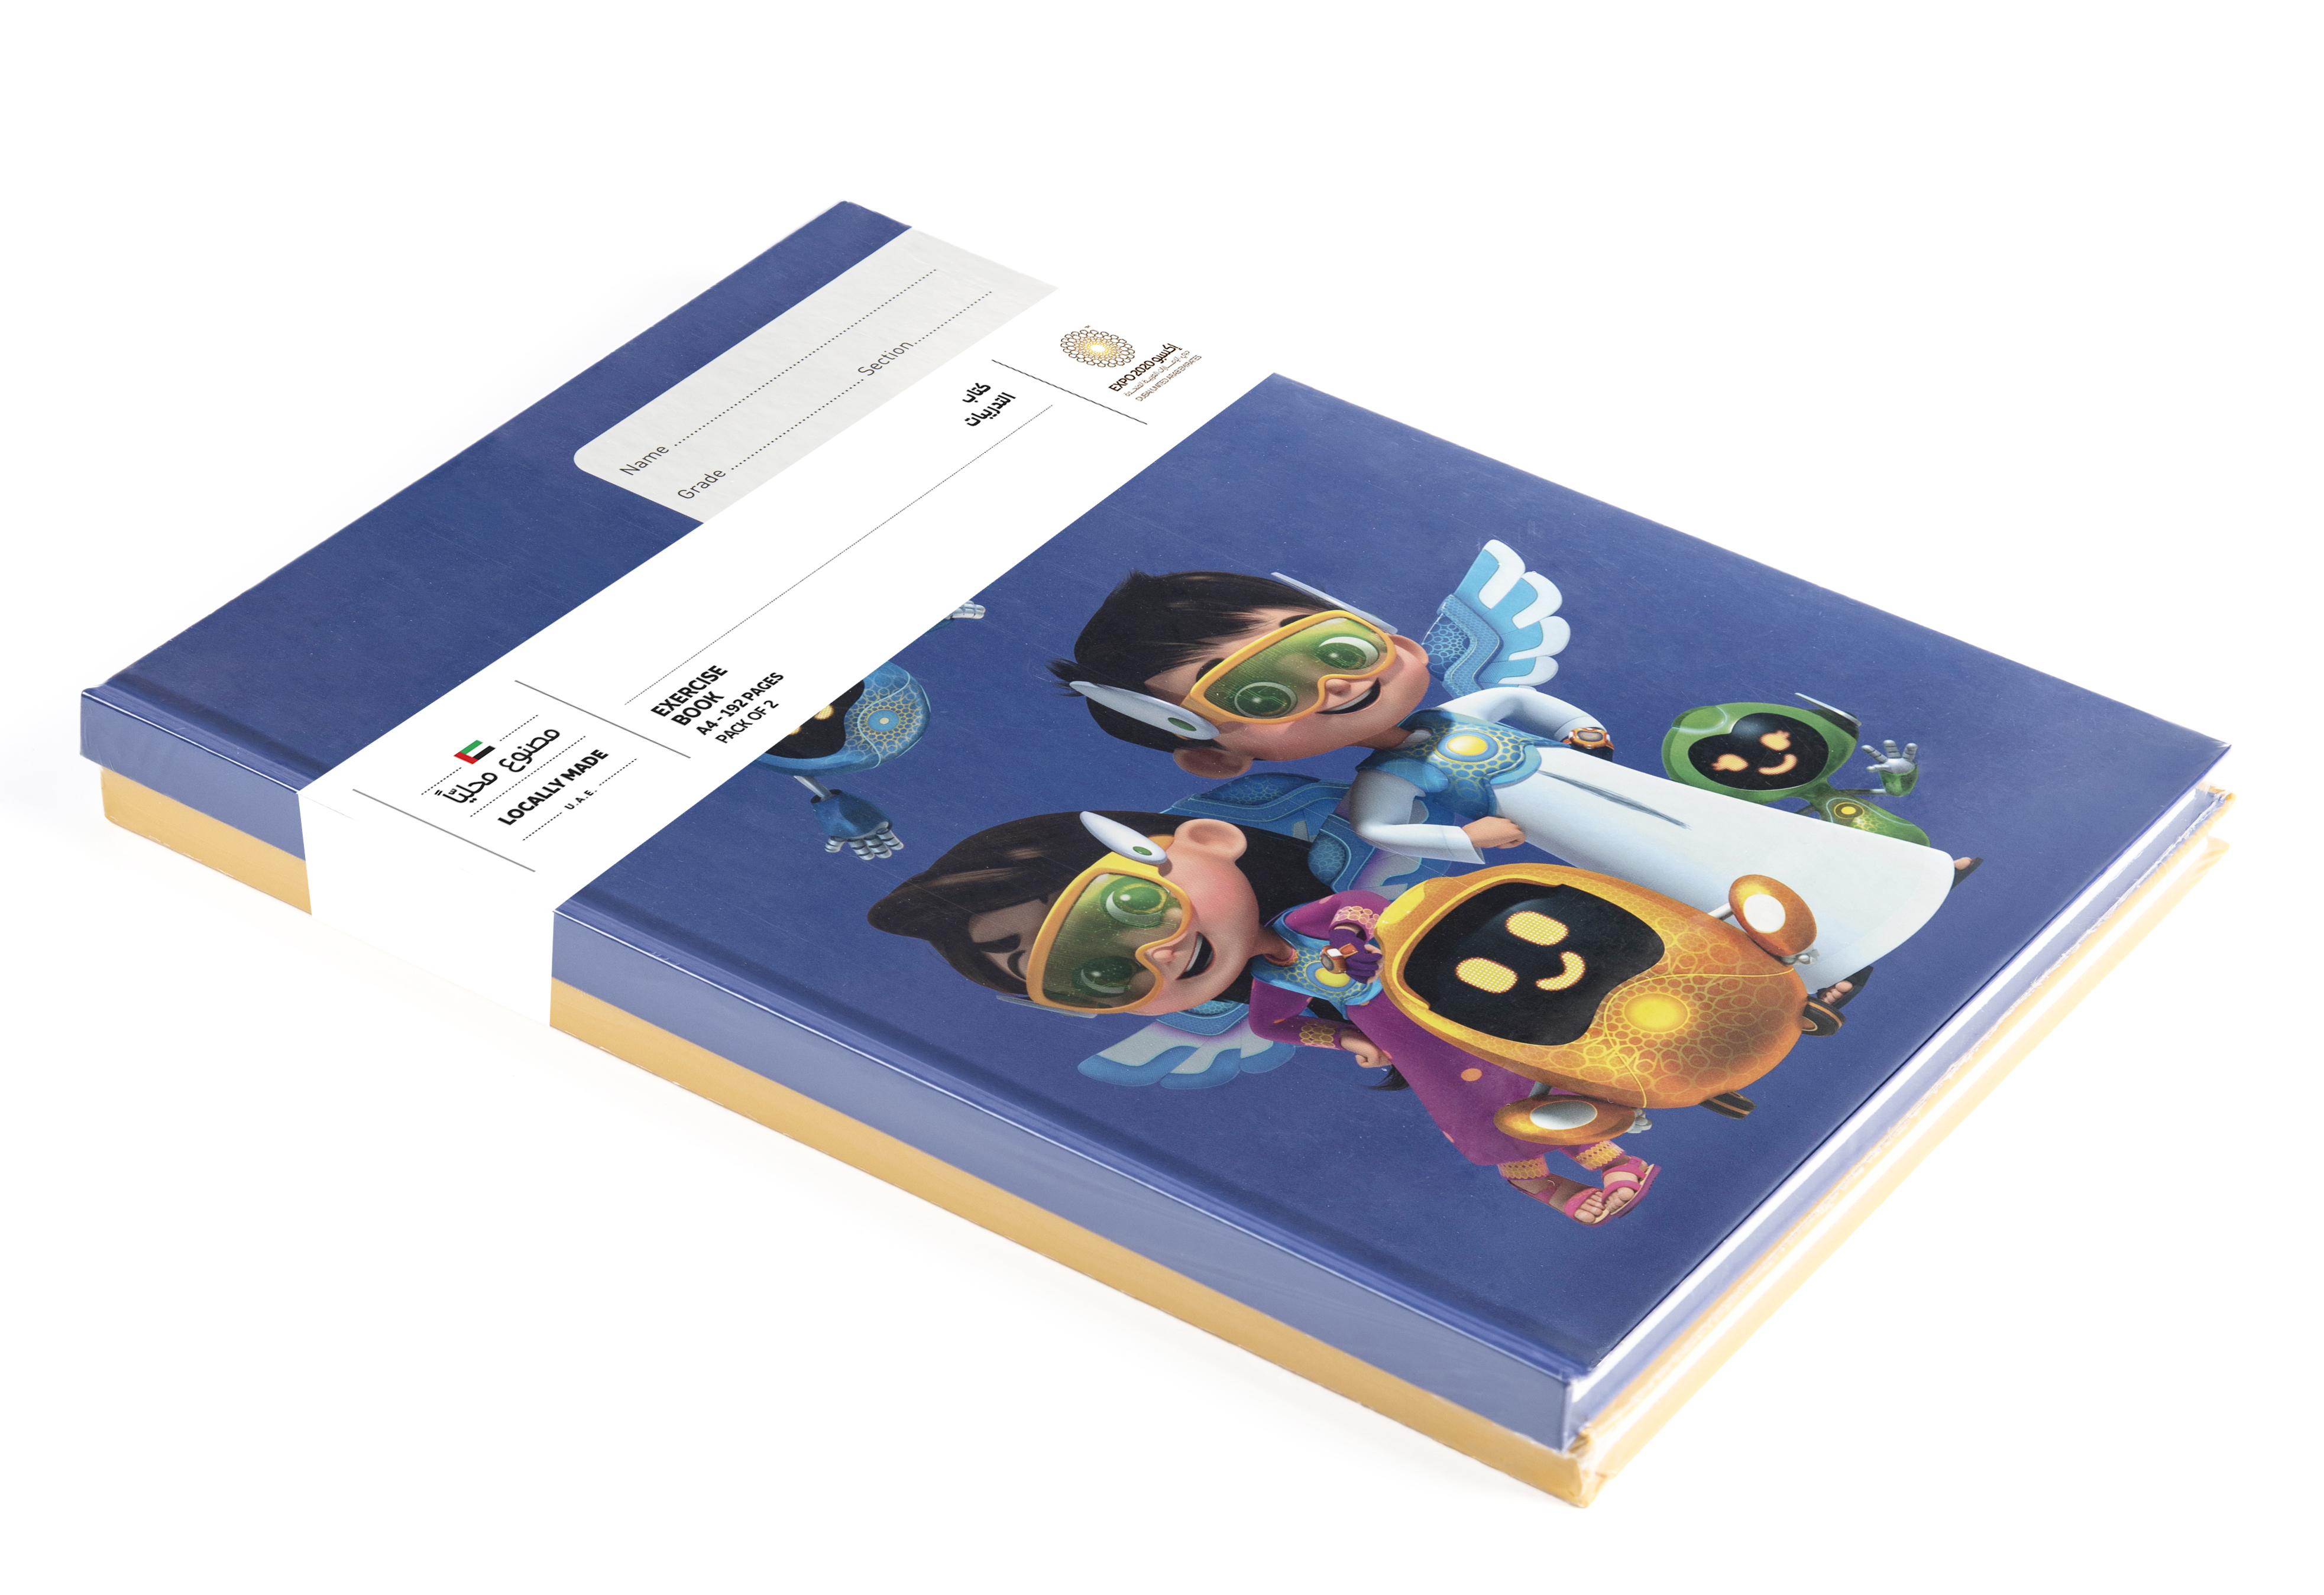 Expo 2020 Dubai Mascots Family A4 Hardcase Exercise Books Pack of 2 - 192 Pages